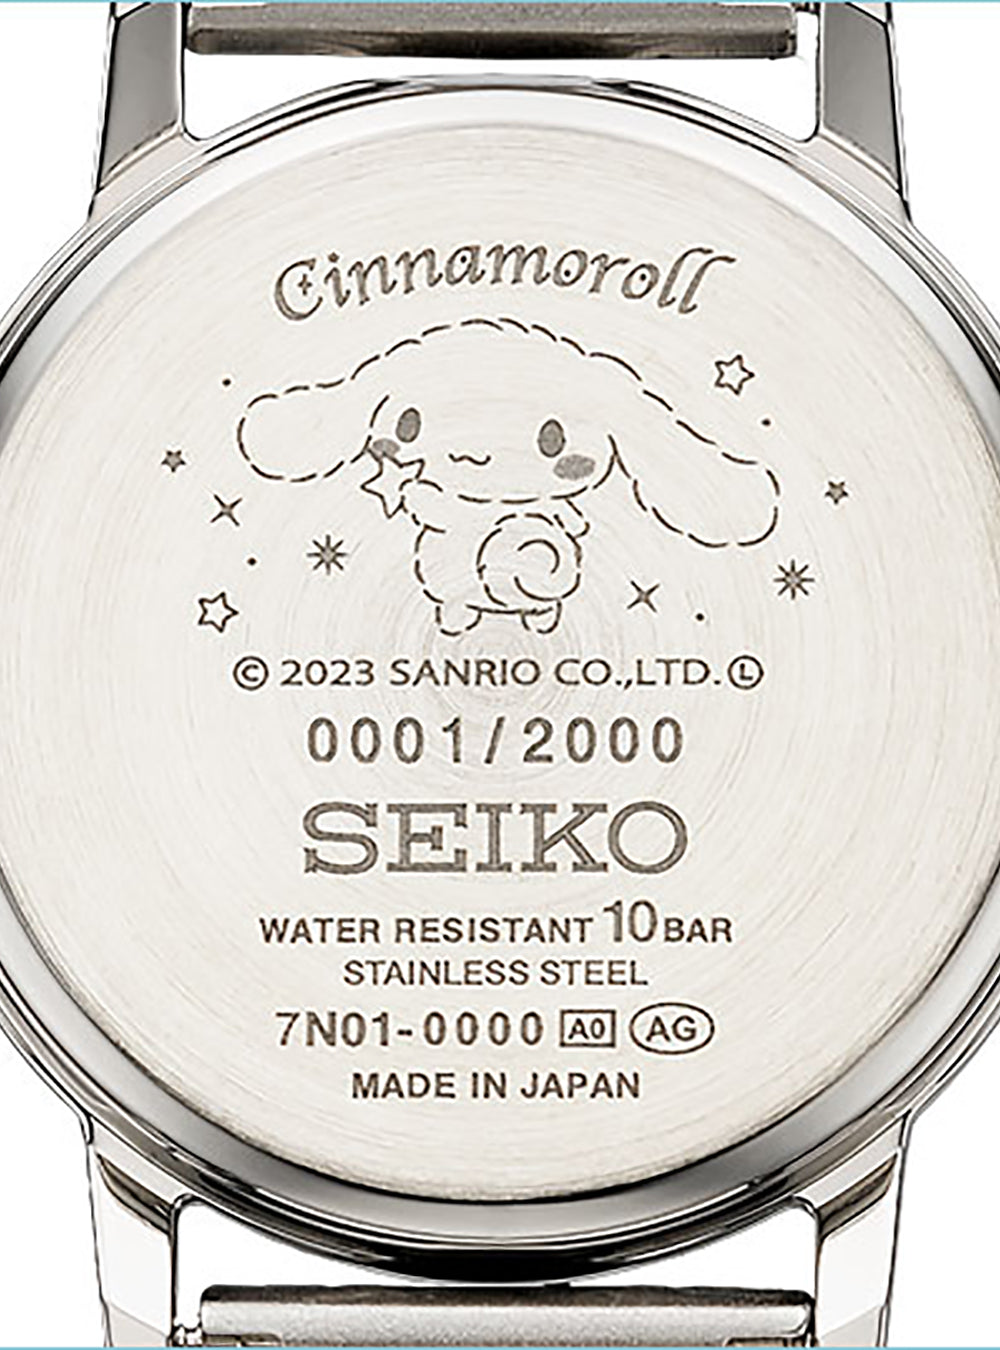 SEIKO×CINNAMOROLL COLLABORATION MODEL LIMITED EDITION MADE IN JAPAN